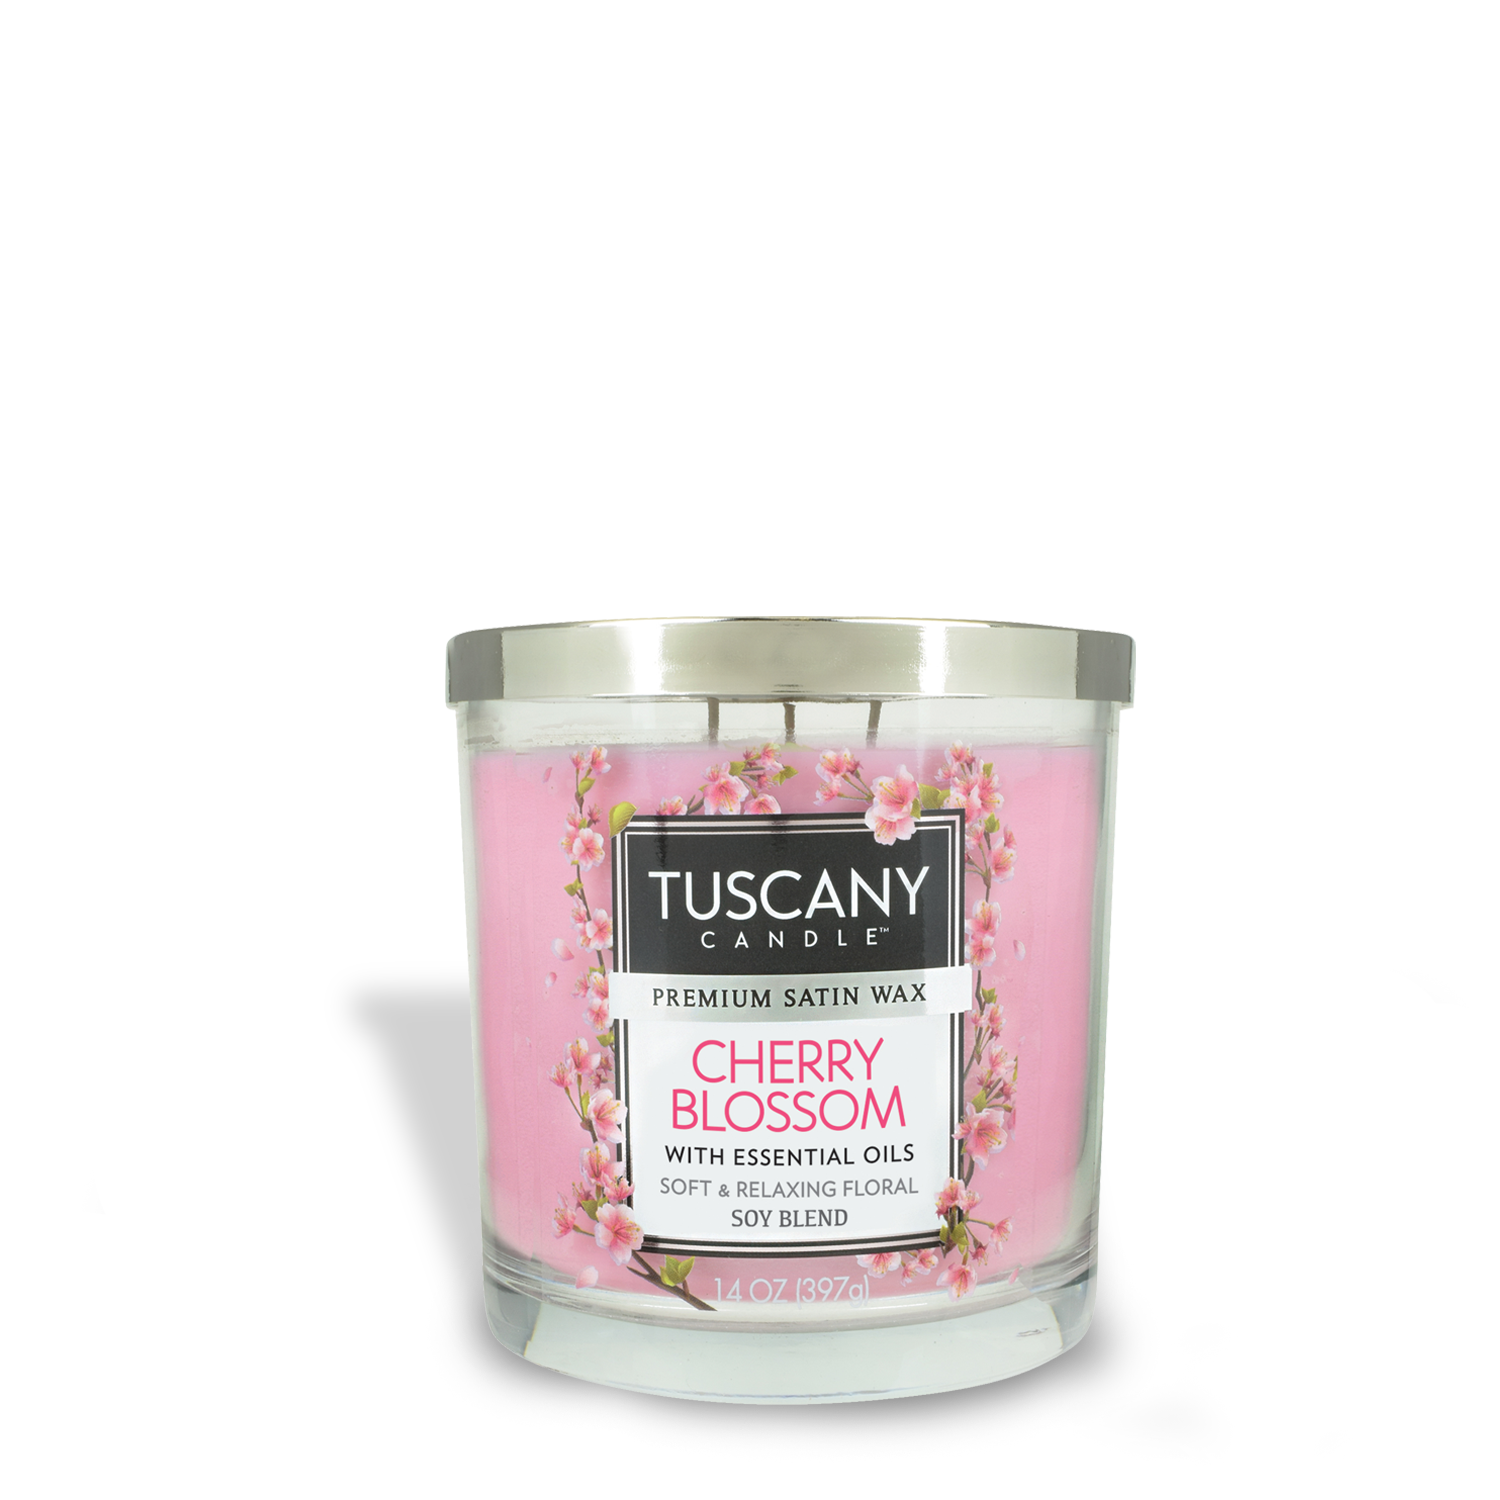 Tuscany Candle Cherry Blossom Long-Lasting Scented Jar Candle (14 oz) with a floral fragrance.